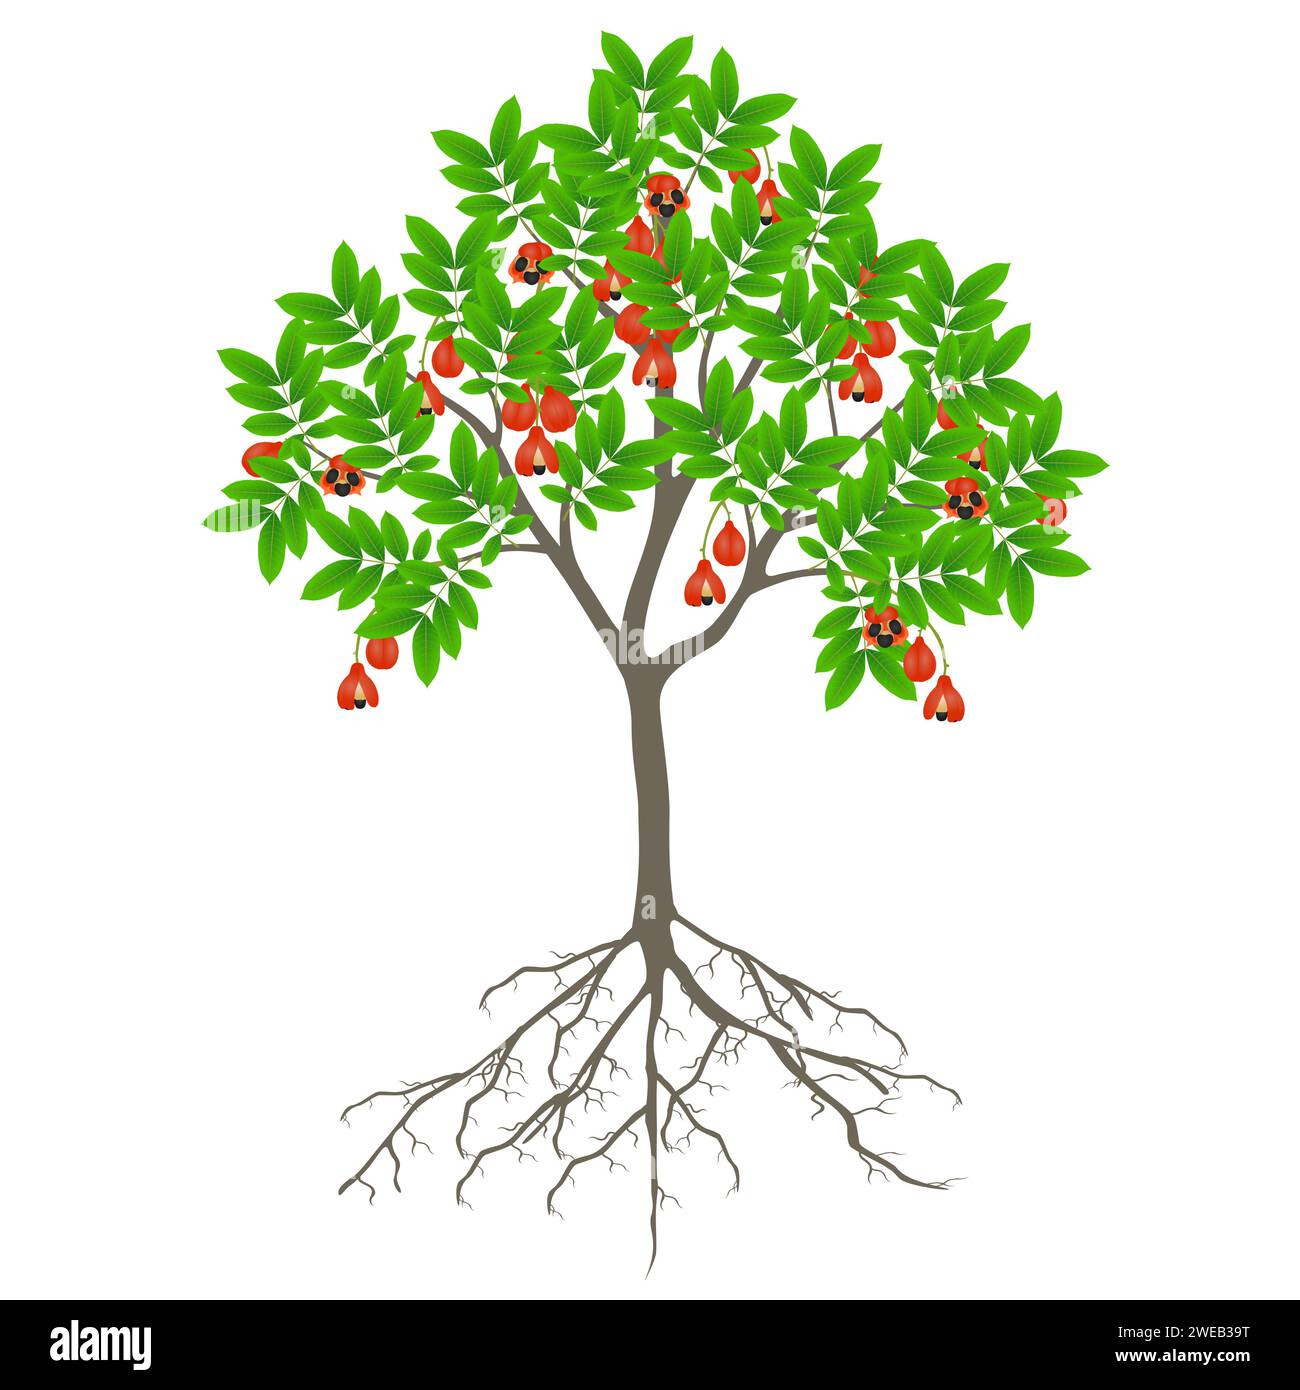 Ackee tree with fruits and roots on a white background. Stock Vector